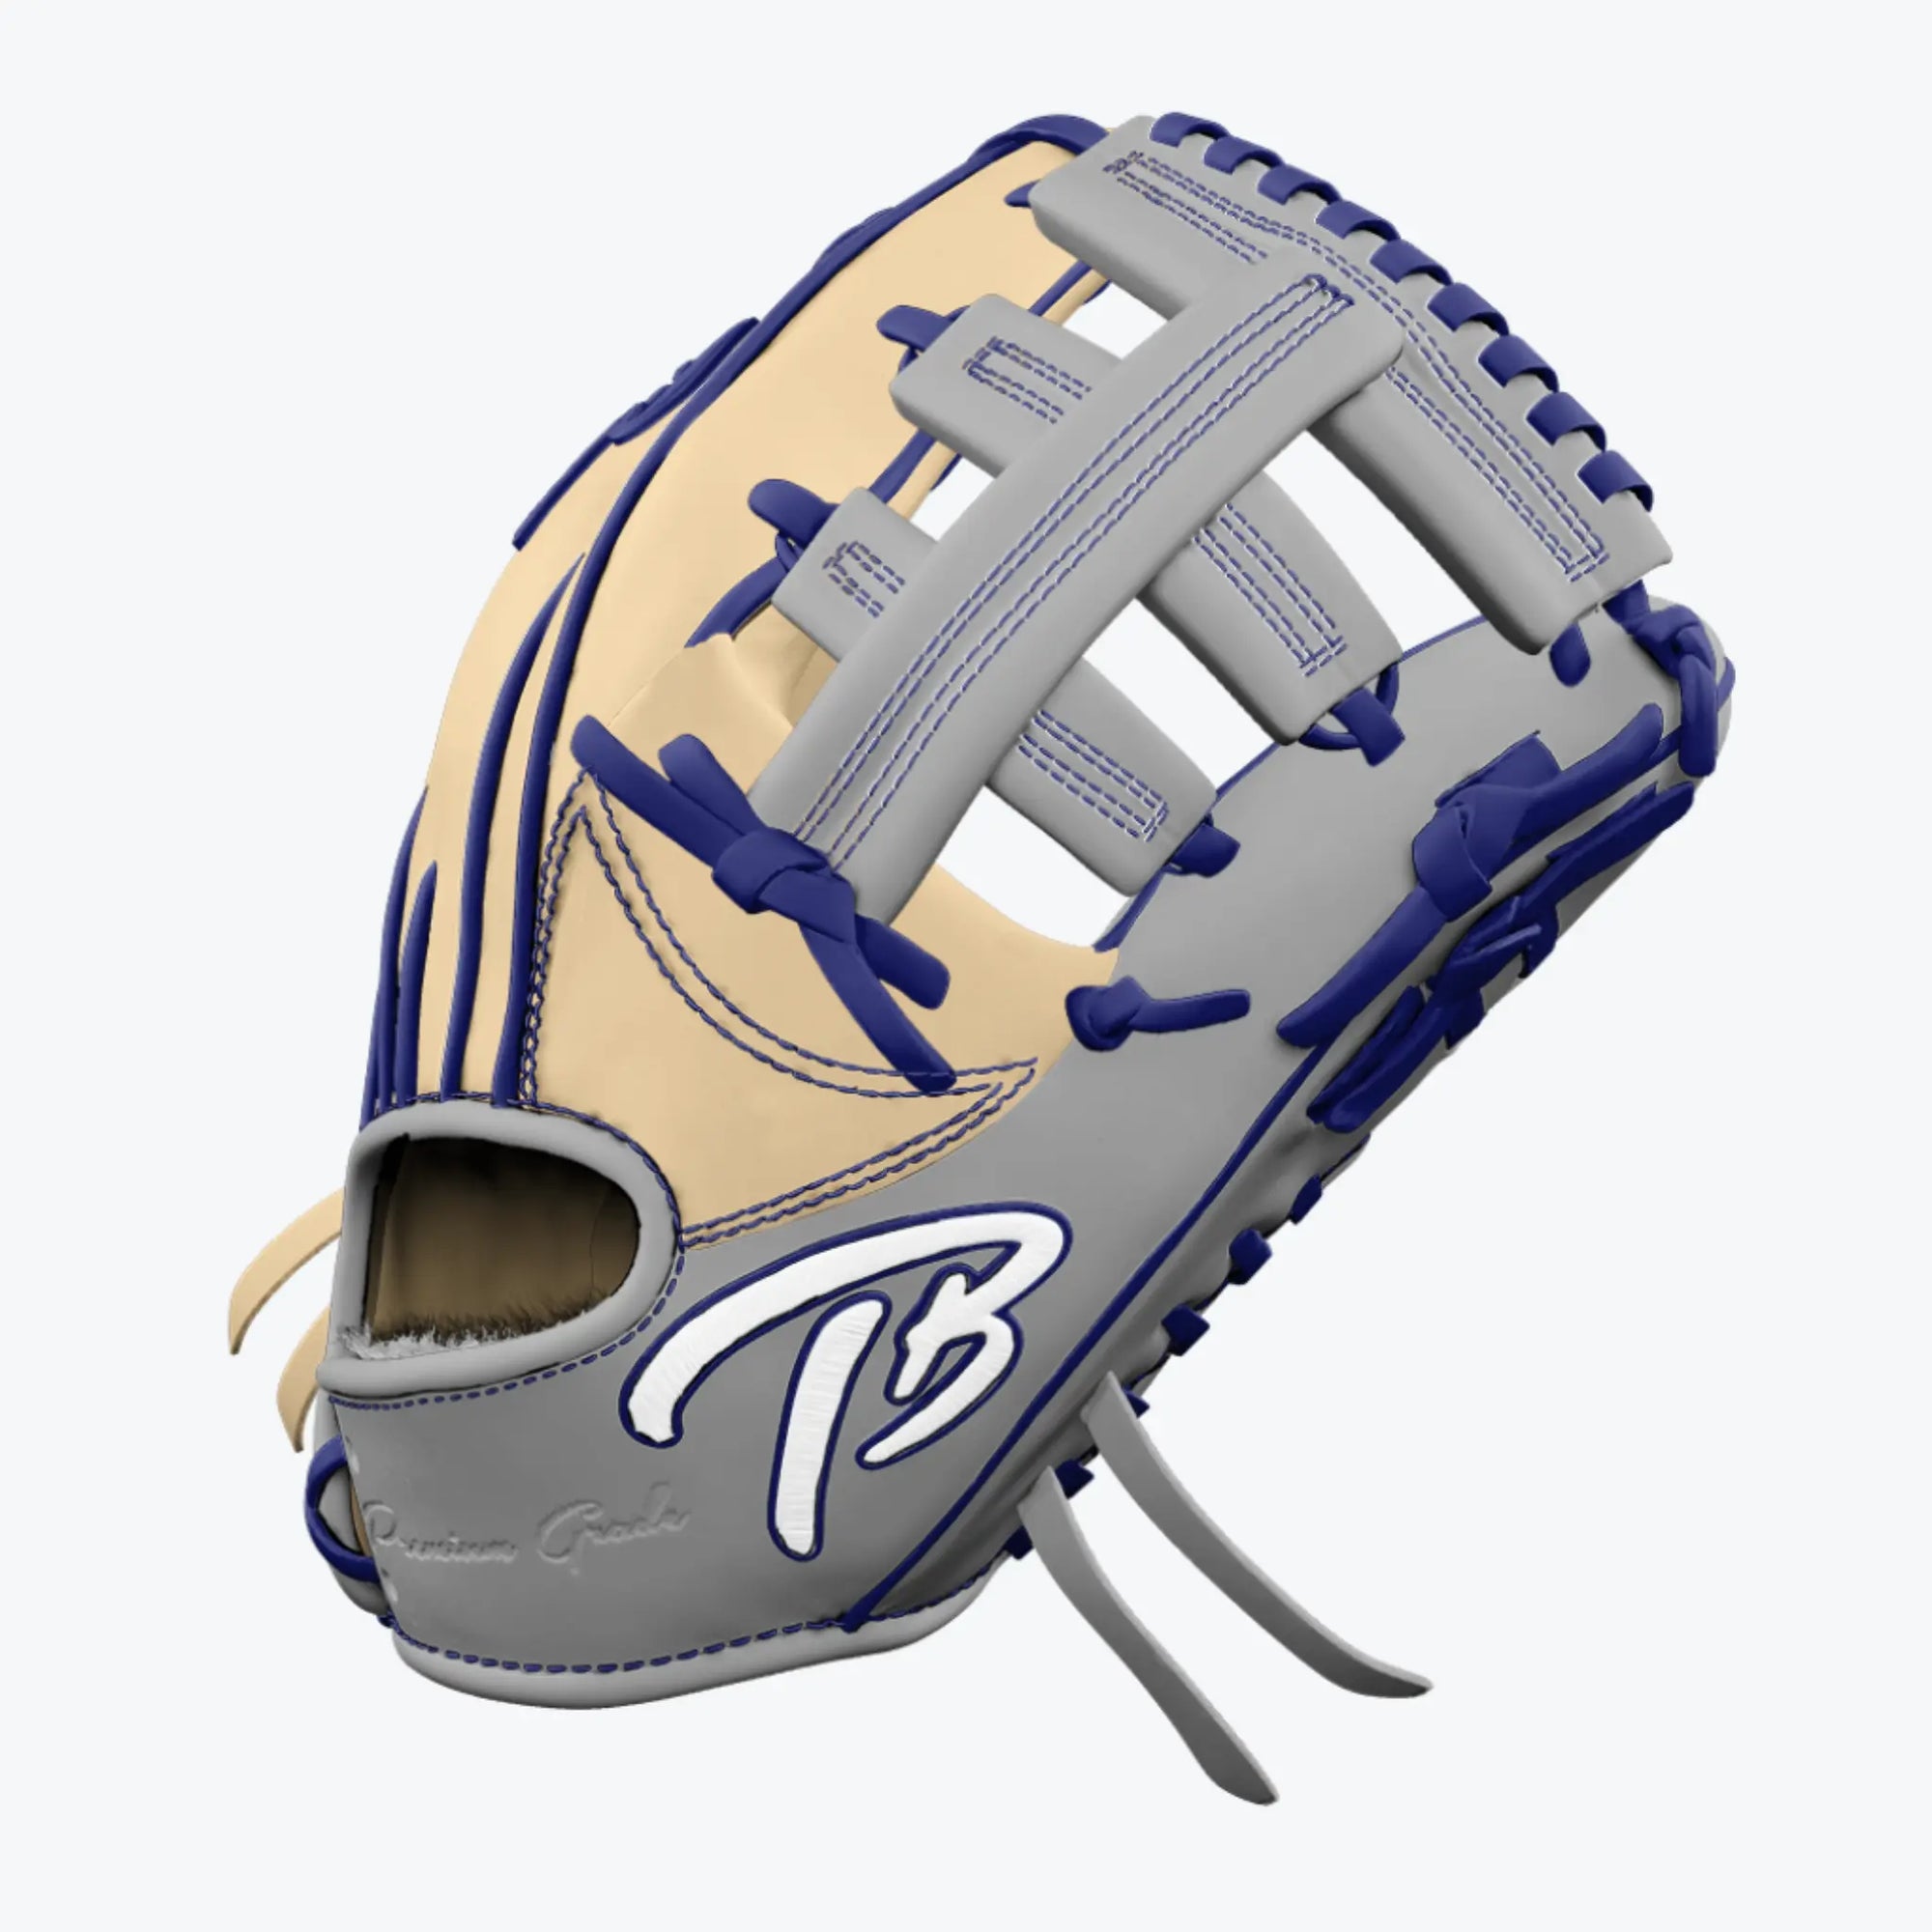 Custom-crafted outfielder's baseball glove with a double post web design by Tater, featuring a cream and navy color scheme, with a prominent 'TB' logo and 'Premium Grade' inscription, ready for game-day action.